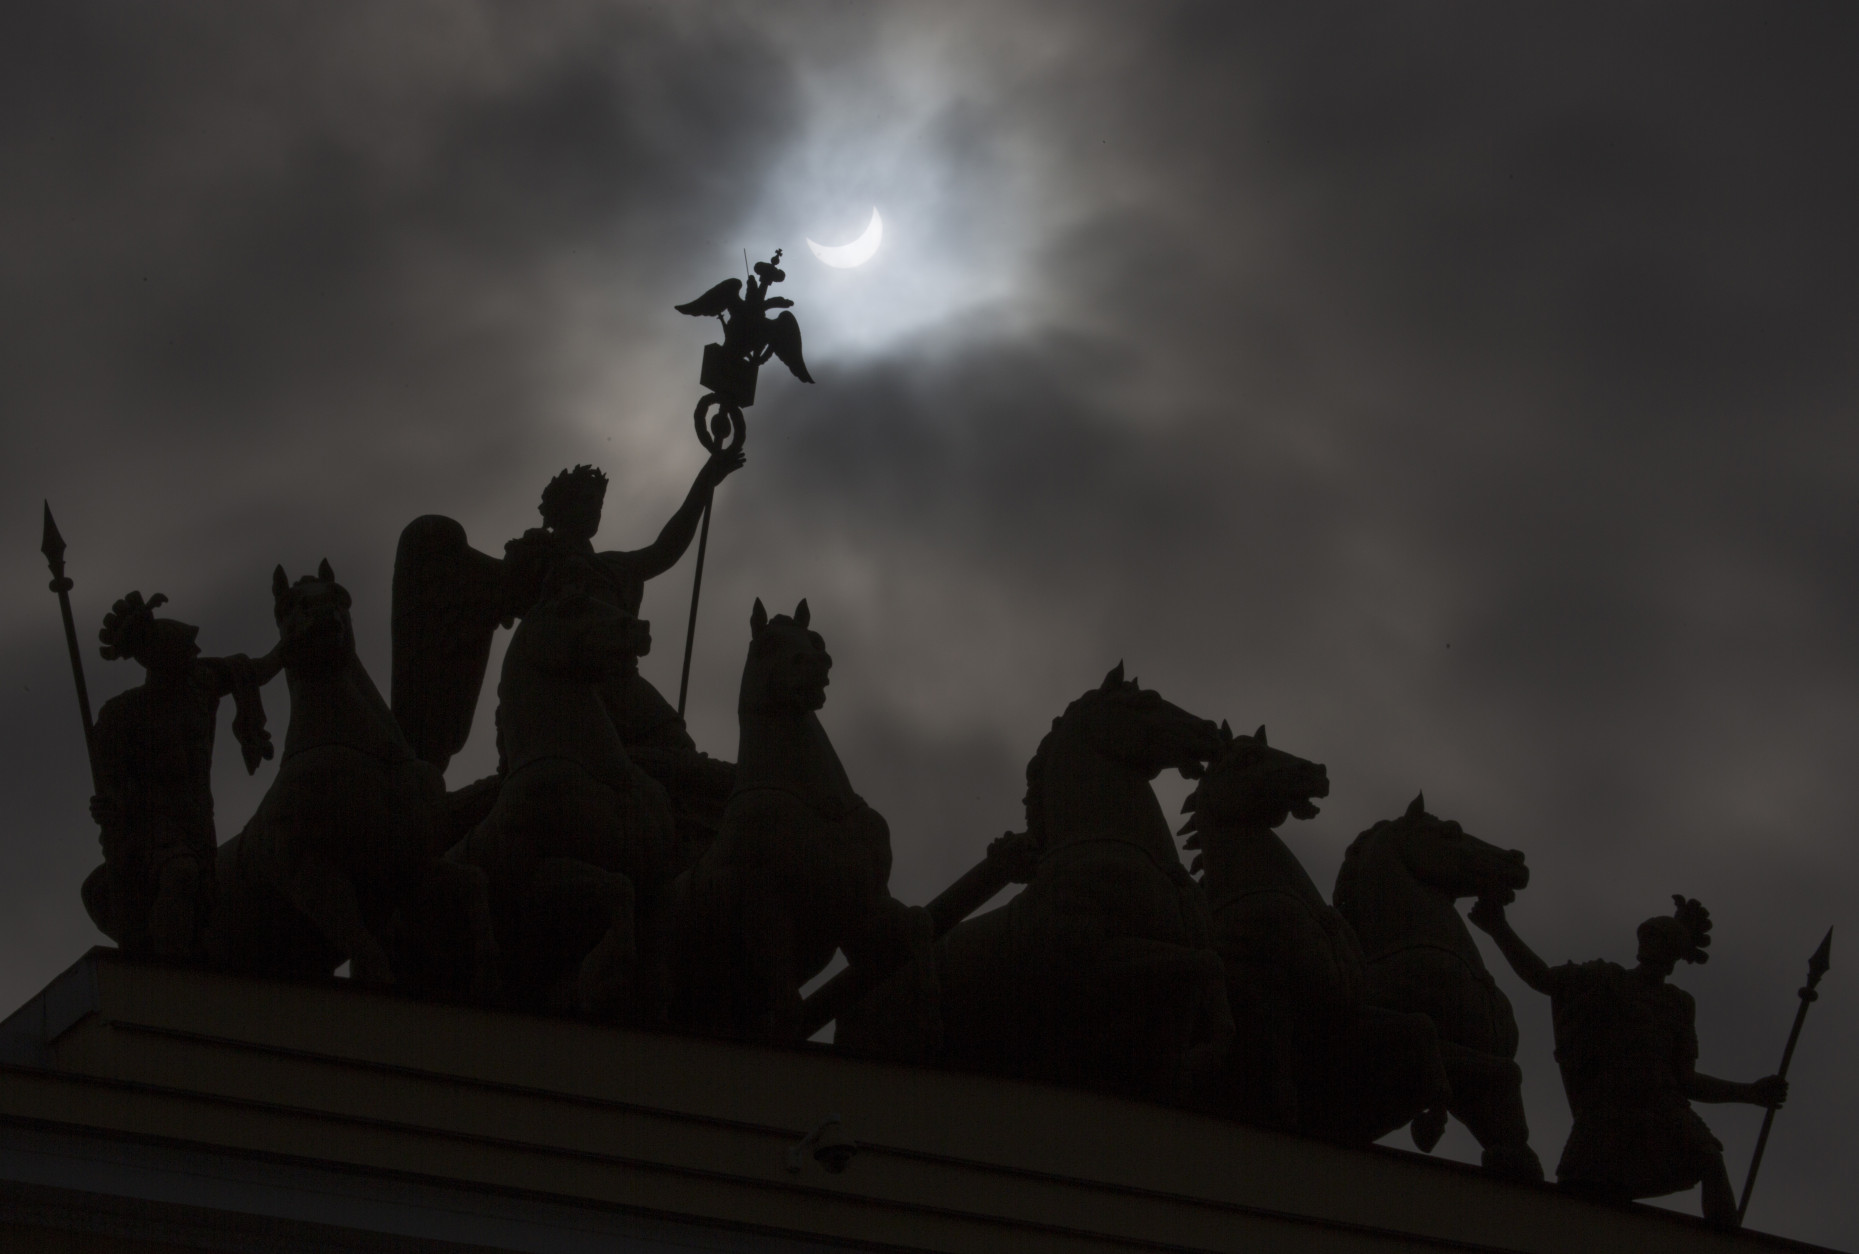 The moon blocks part of the sun during a solar eclipse as seen over a statue at the one of the city landmarks, the General Staff Headquarters in St.Petersburg, Russia, Friday, March 20, 2015. An eclipse is darkening parts of Europe on Friday in a rare solar event that won't be repeated for more than a decade.  (AP Photo/Dmitry Lovetsky)